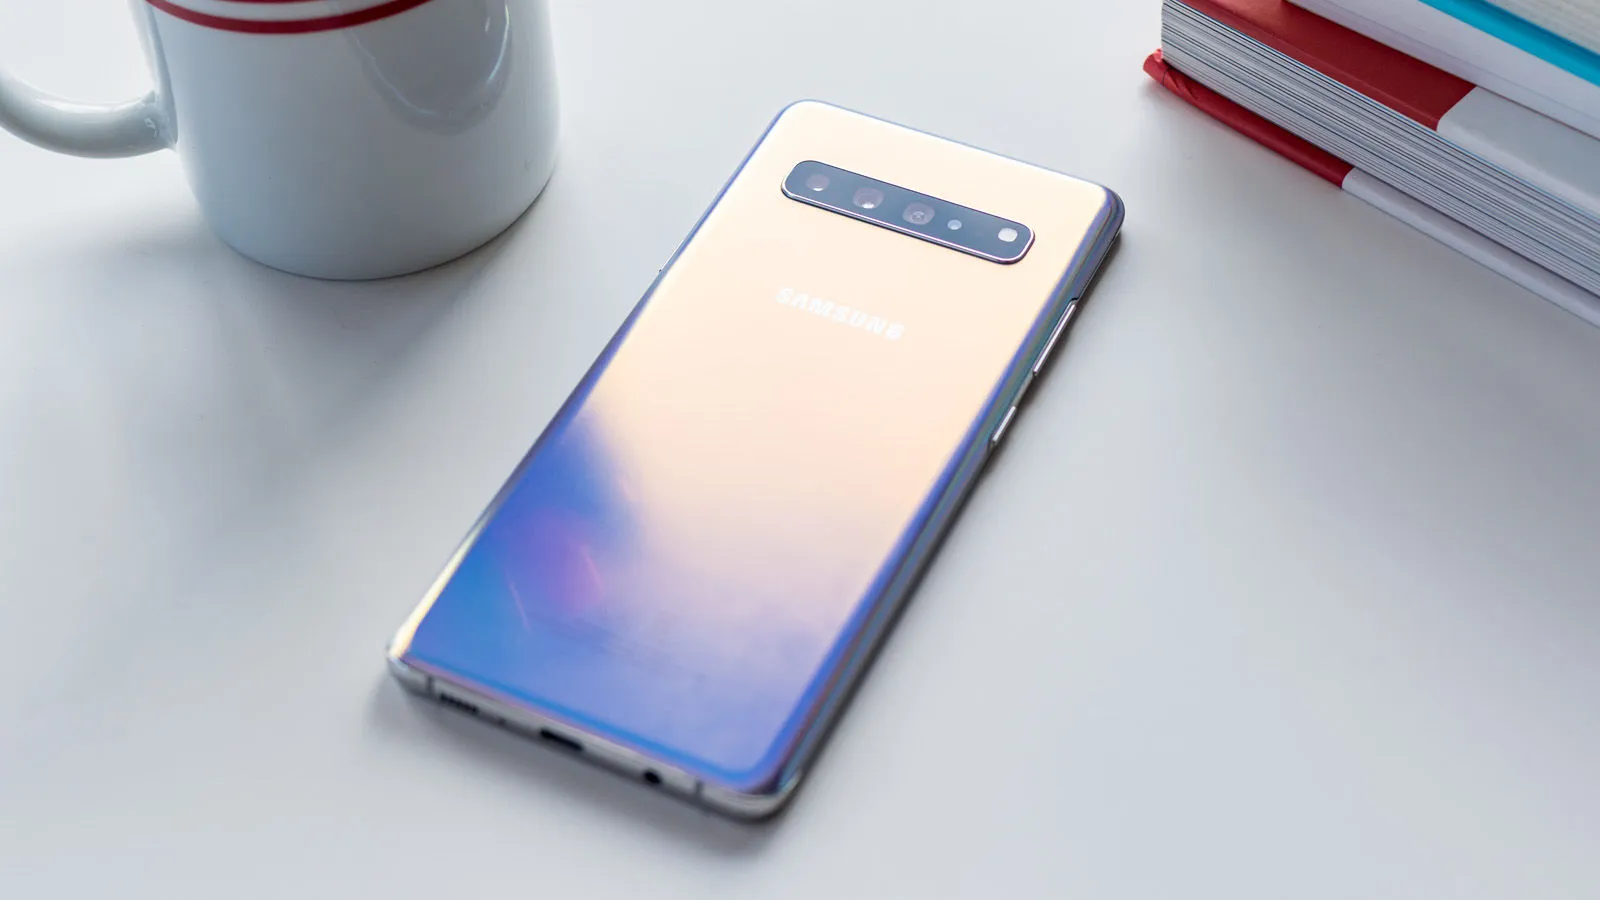 Fix Samsung Galaxy S10 5G that gets stuck on the logo during boot up